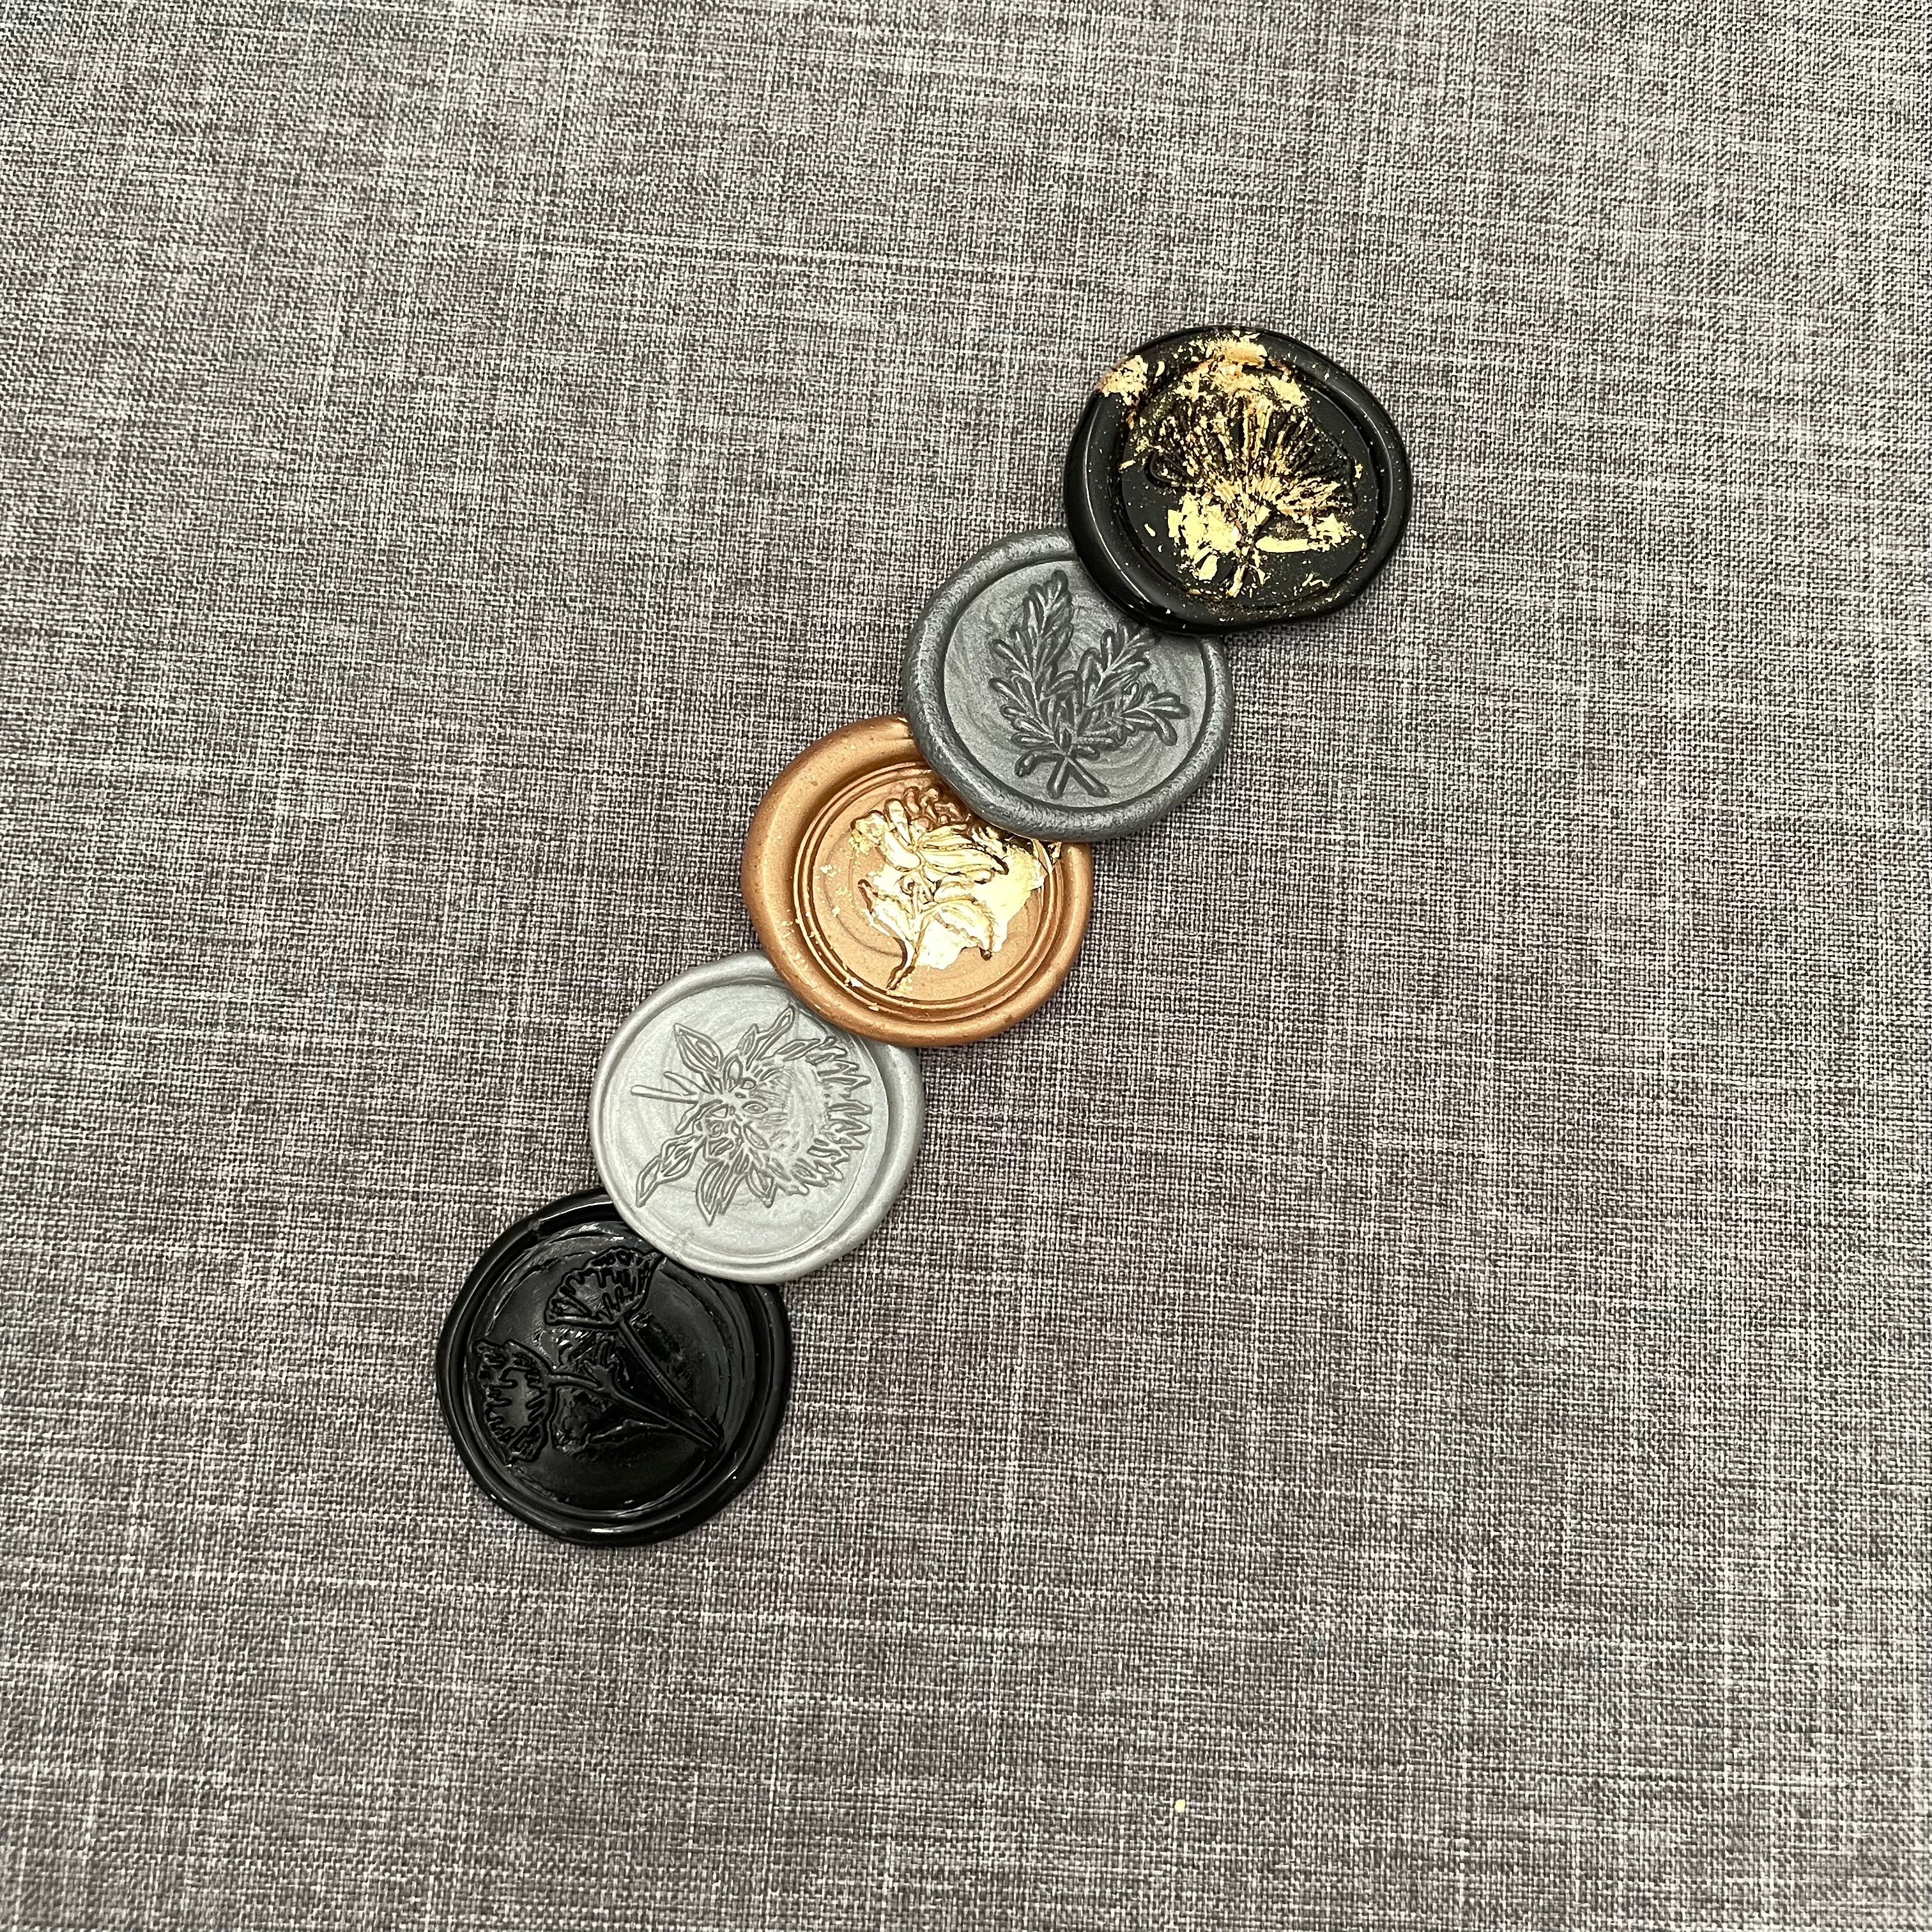 5 black, gold, and gray wax seals  - Wedding Flat lay props from Champagne & GRIT